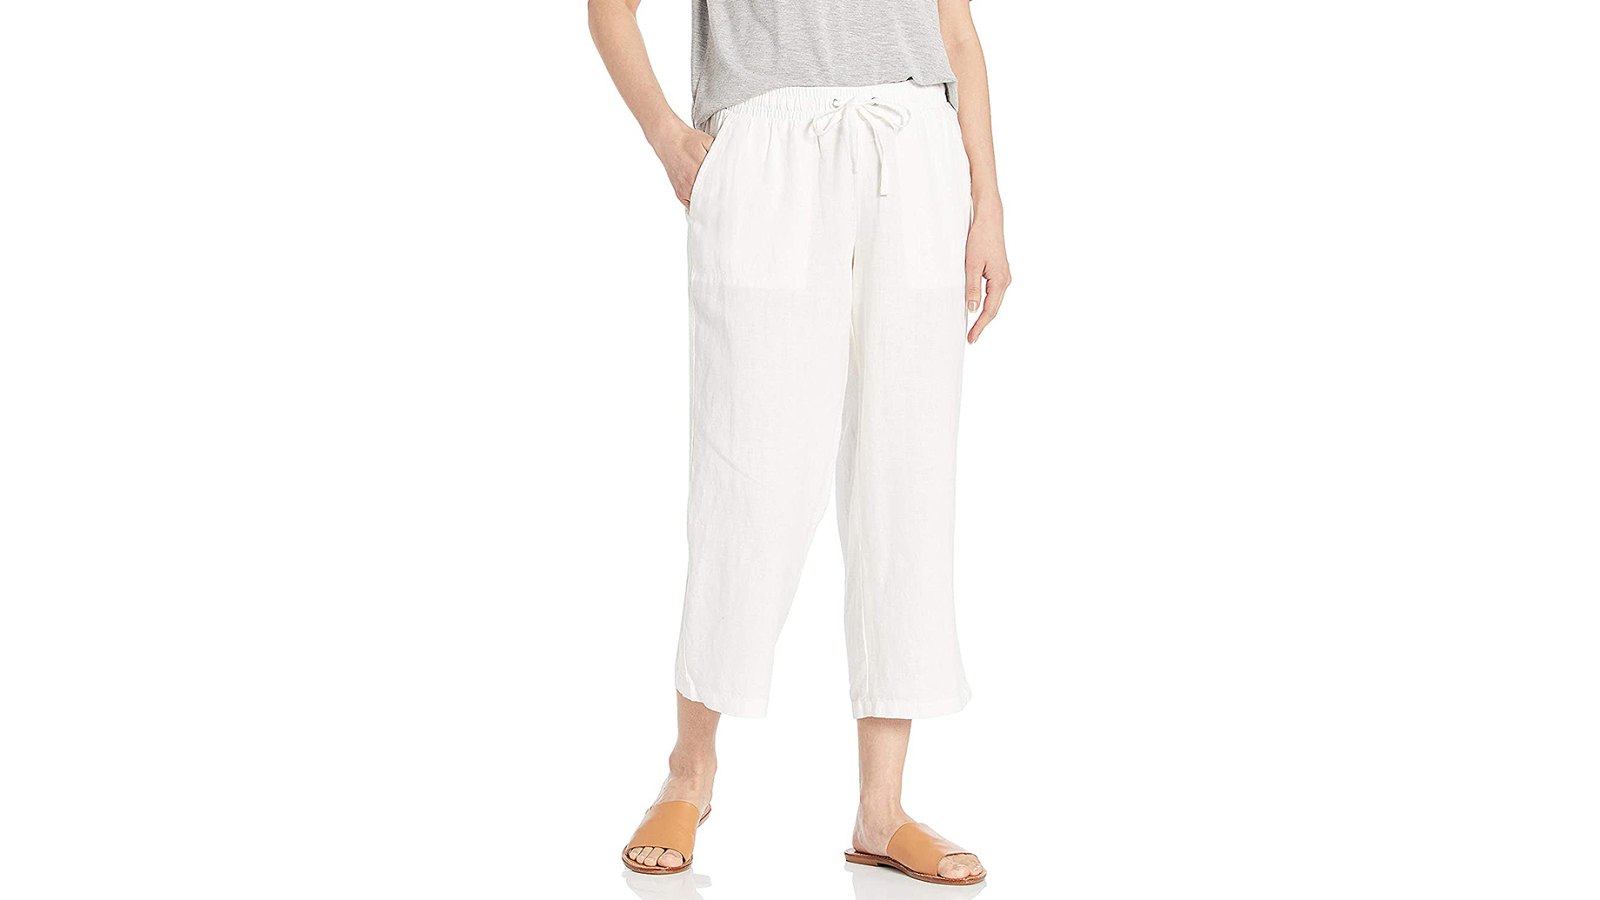 Amazon Essentials Linen Crop Pants Are Perfect for Summer